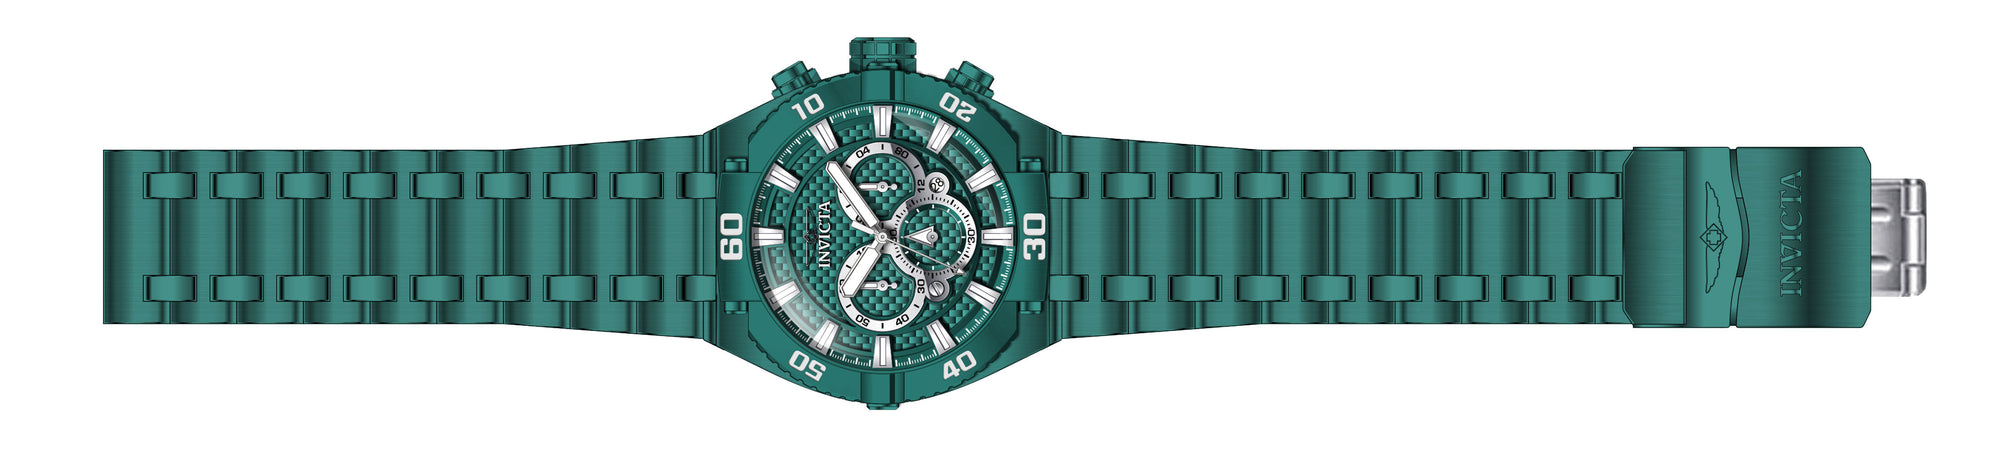 Band for Invicta Coalition Forces Men 40915